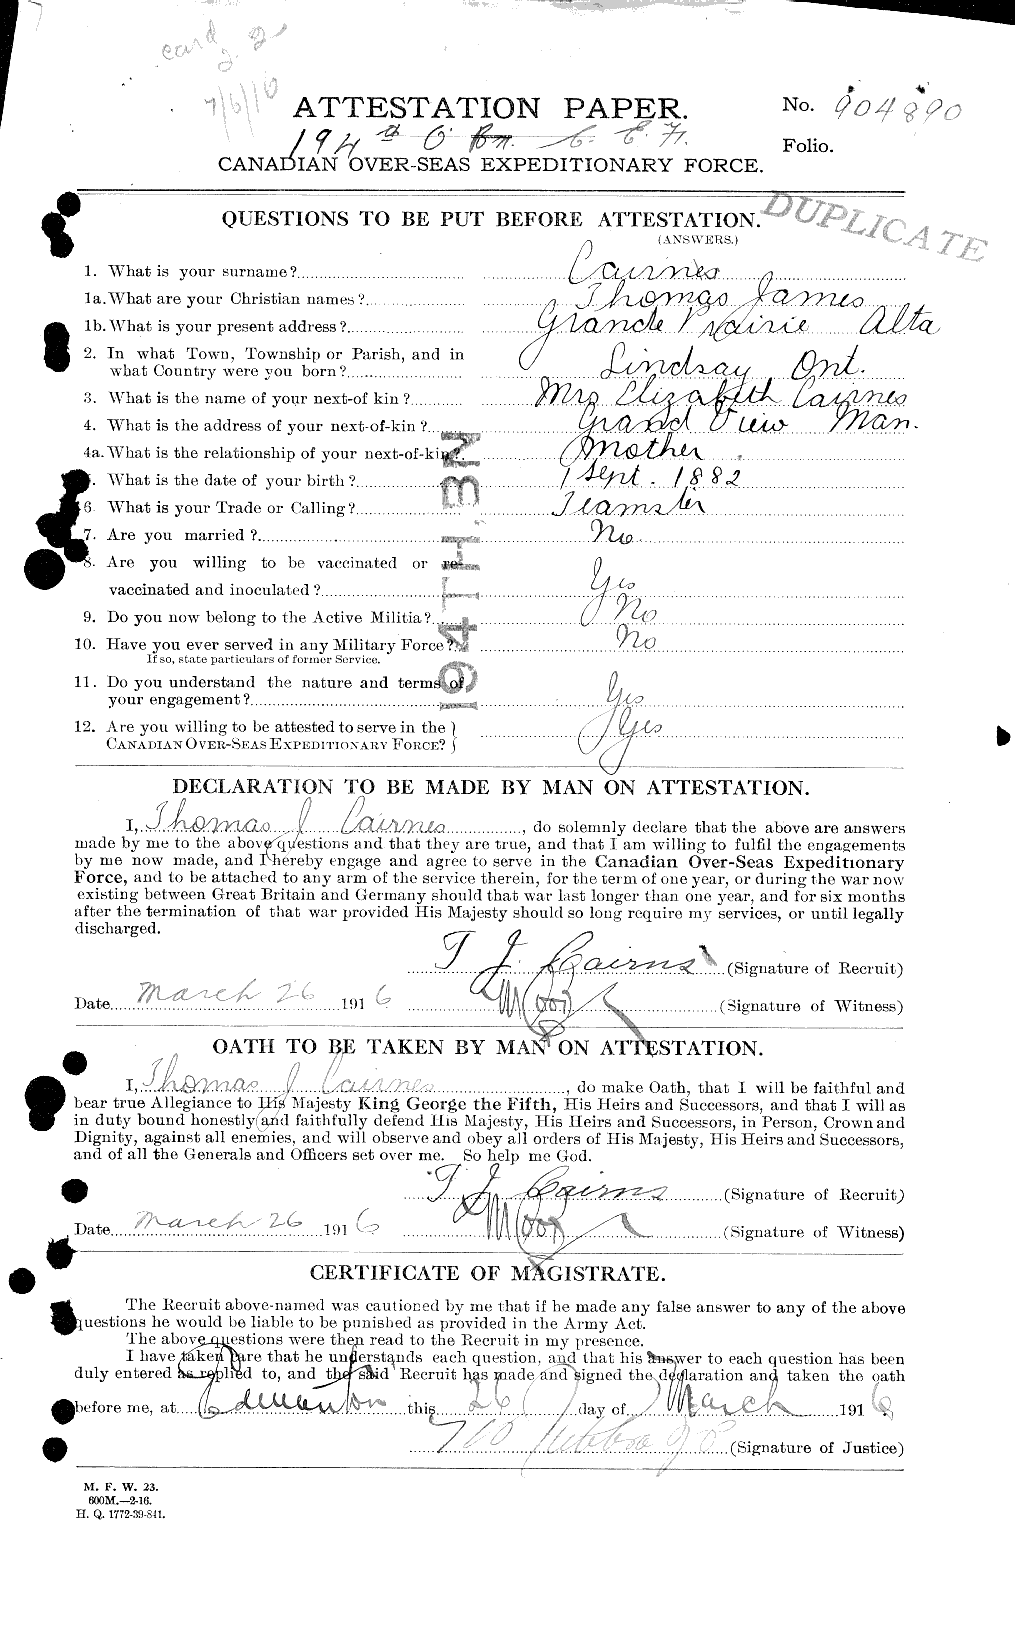 Personnel Records of the First World War - CEF 000527a